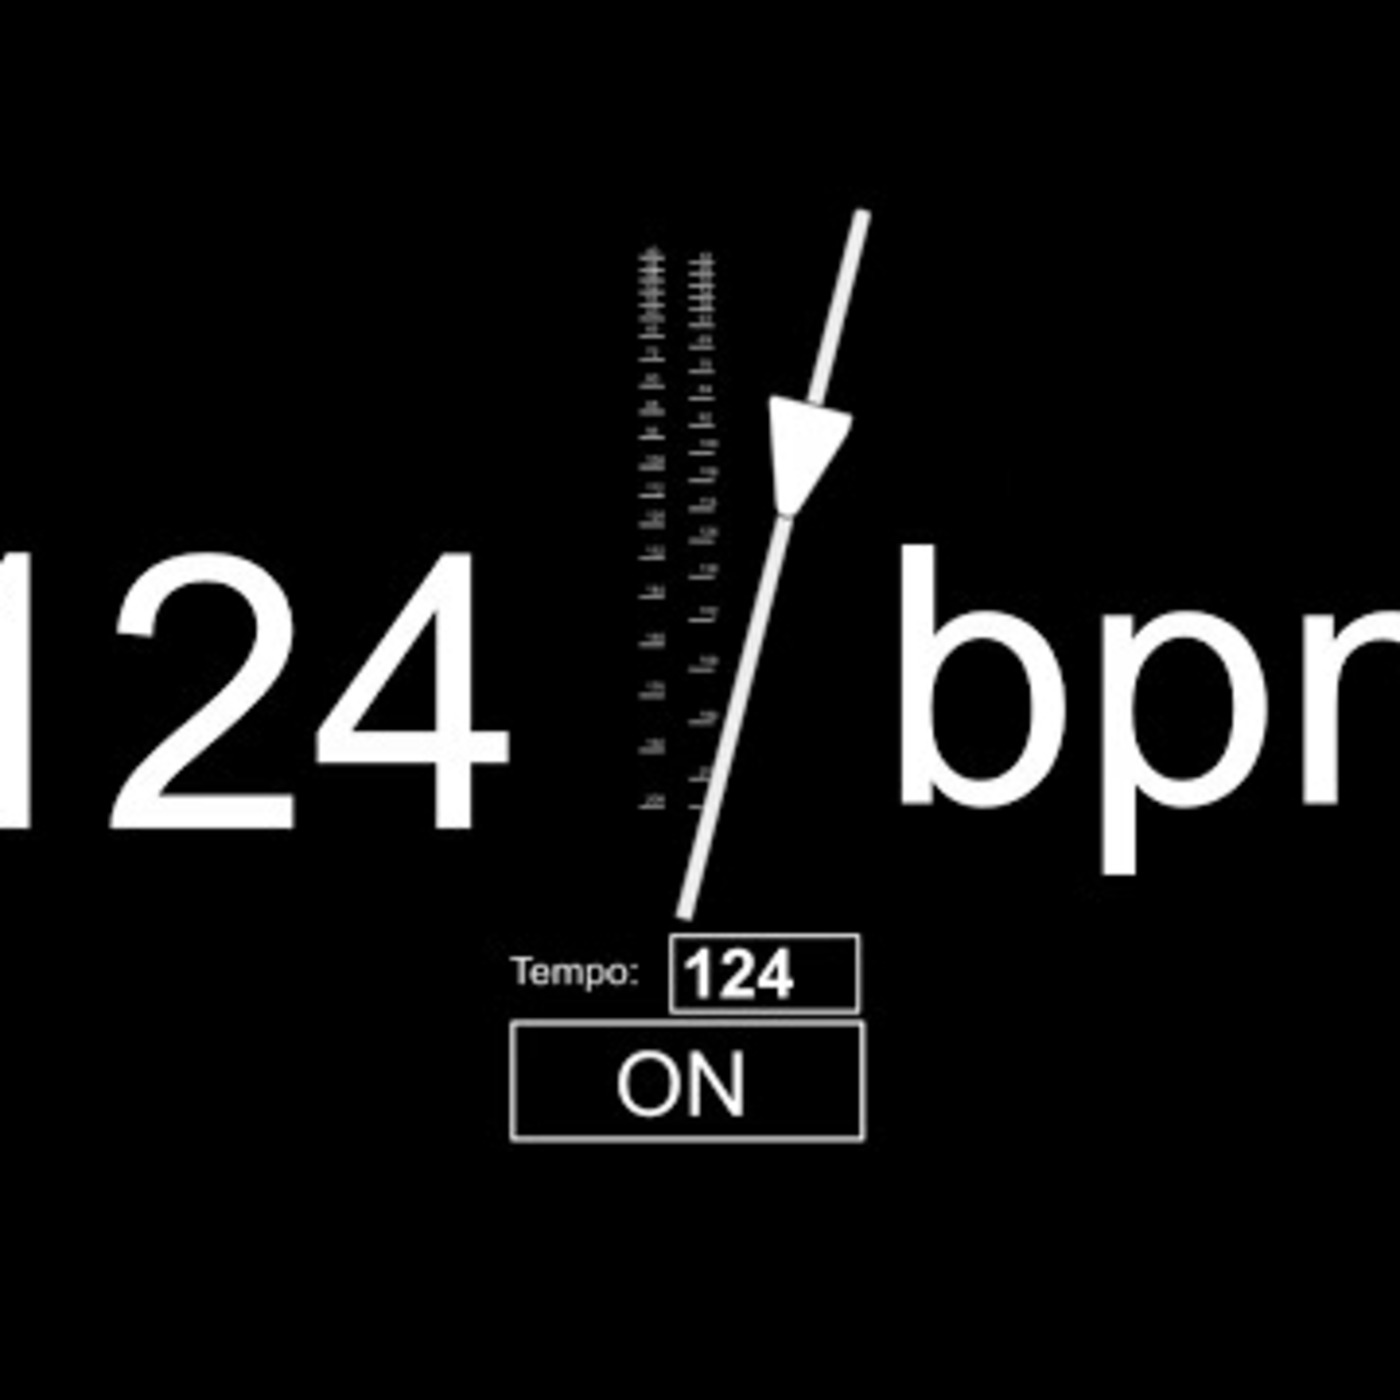 Episode 144: 124 BPM (CANALE)